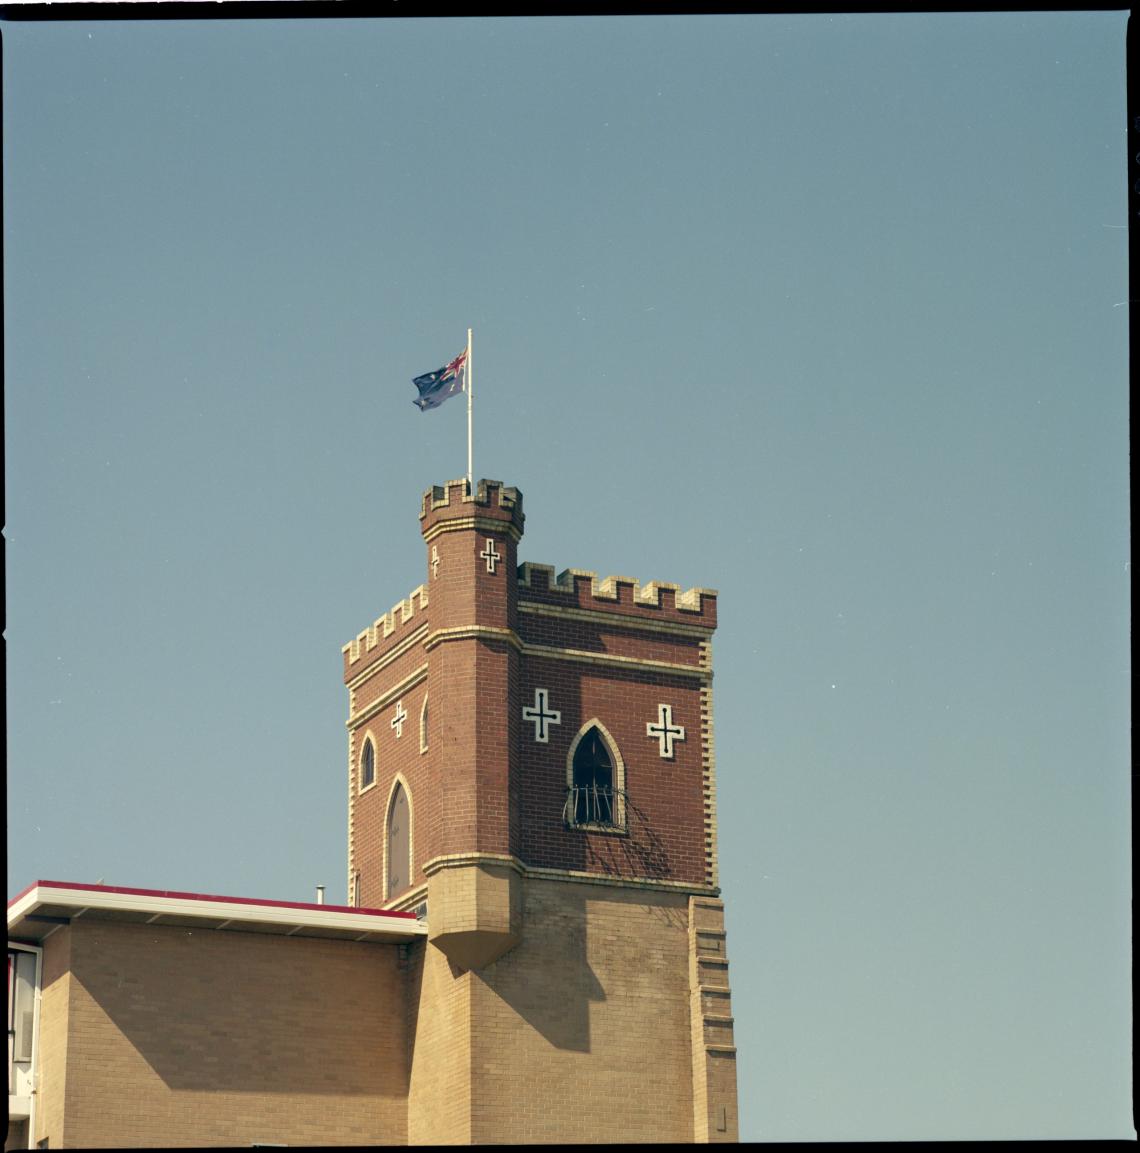 Architectural detail of Red Castle Motel - the tower